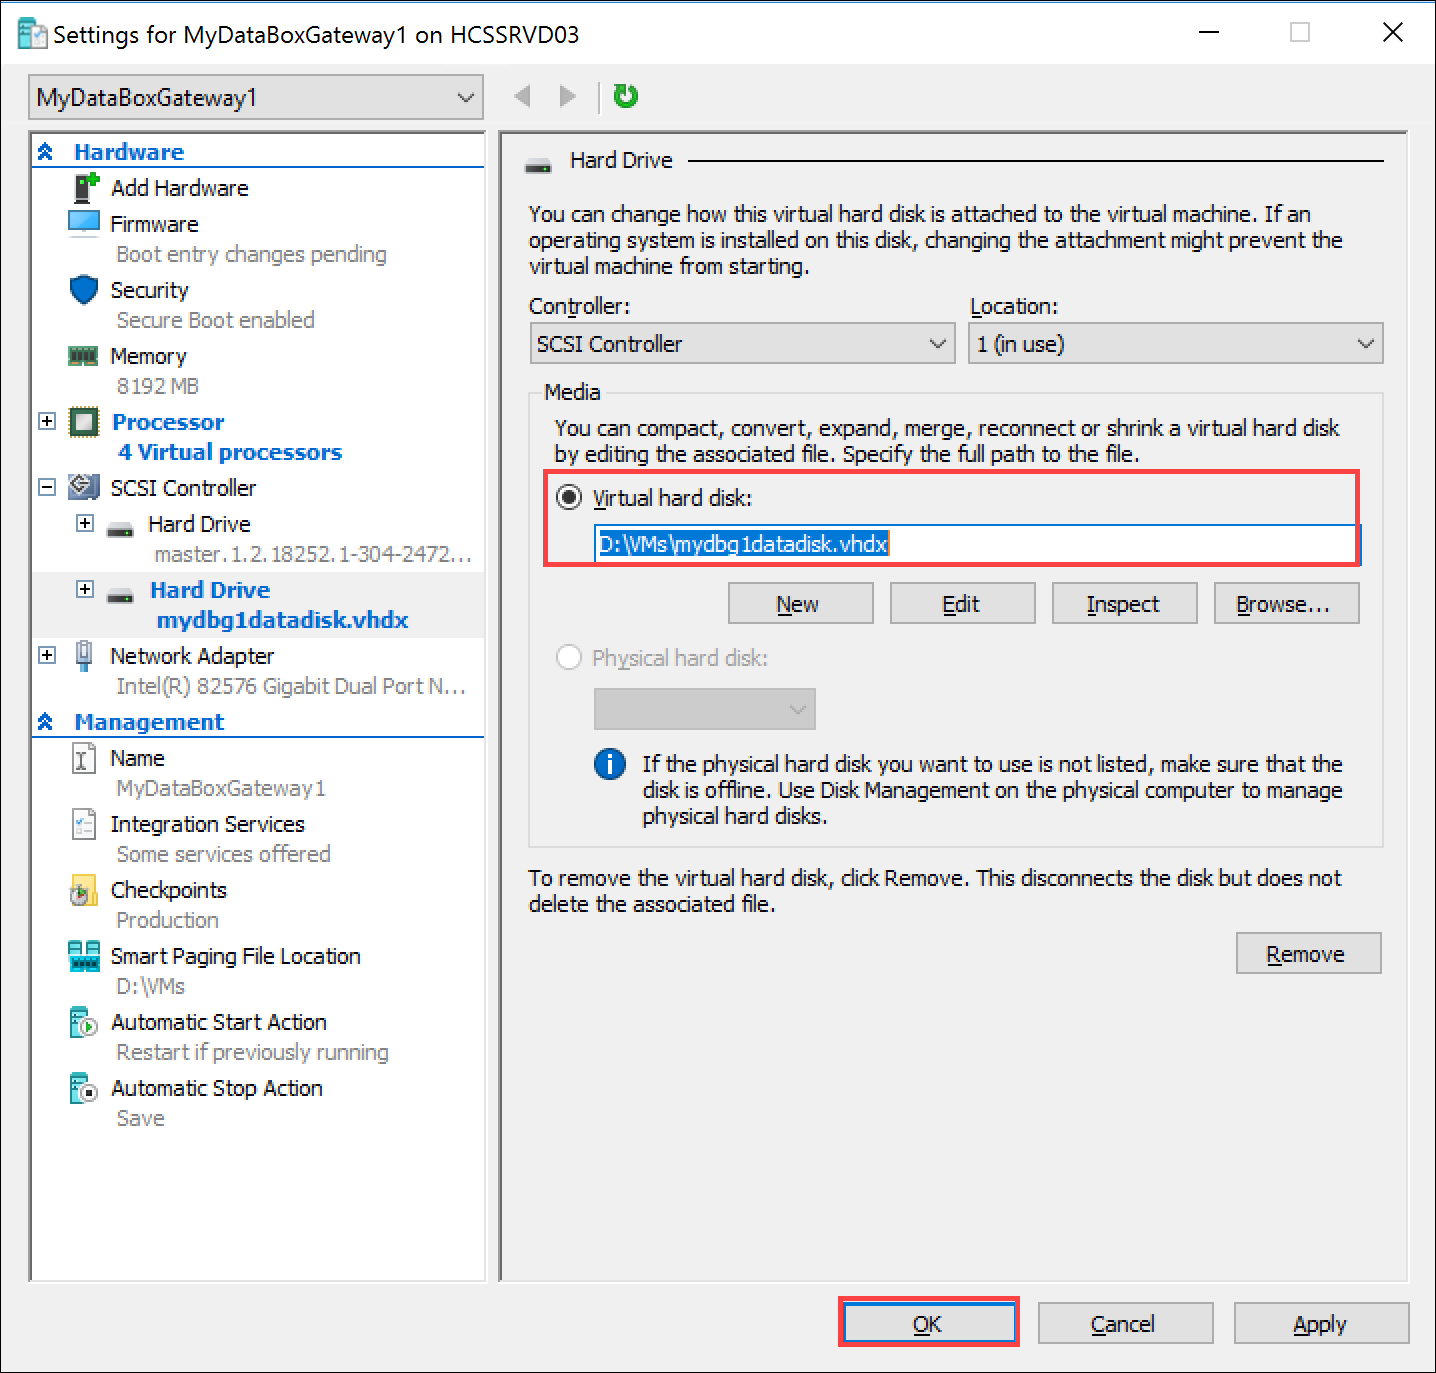 Scroll down and locate Hyper-V in the list of features.
Check the box next to Hyper-V and click OK.